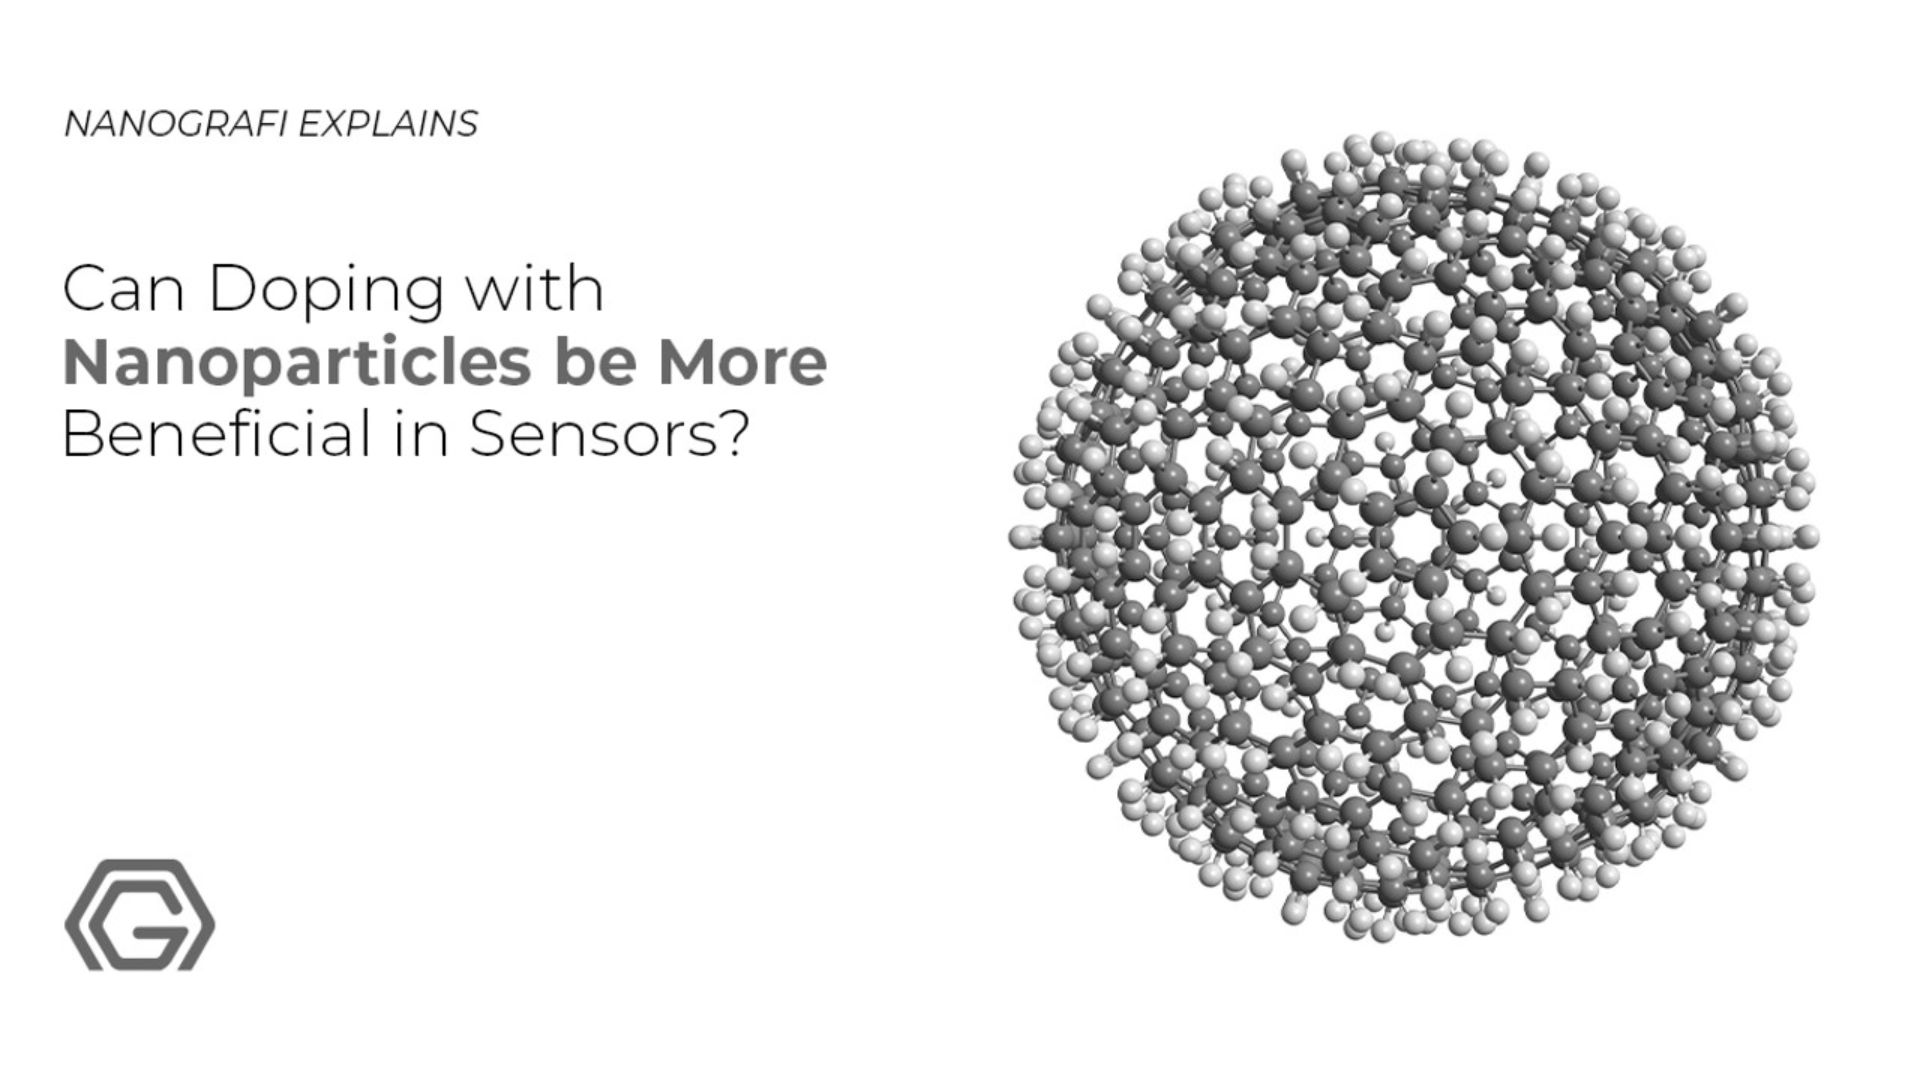 Can doping with nanoparticles be more beneficial in sensors?